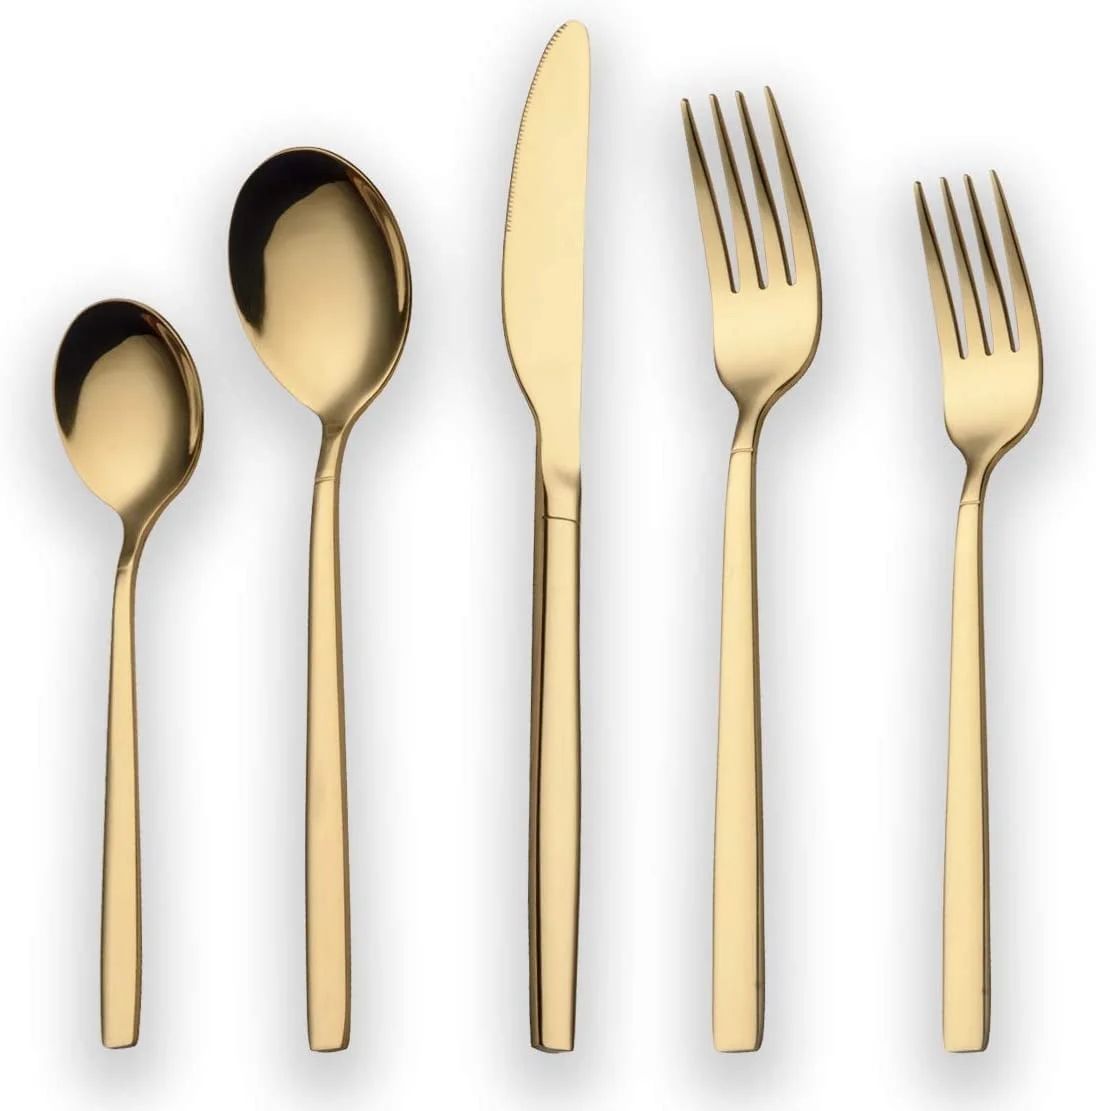 20 Pieces Gold Plated Stainless Steel Flatware Set, Sliverware Cutlery Set Service for 4, Mirror ... | Walmart (US)